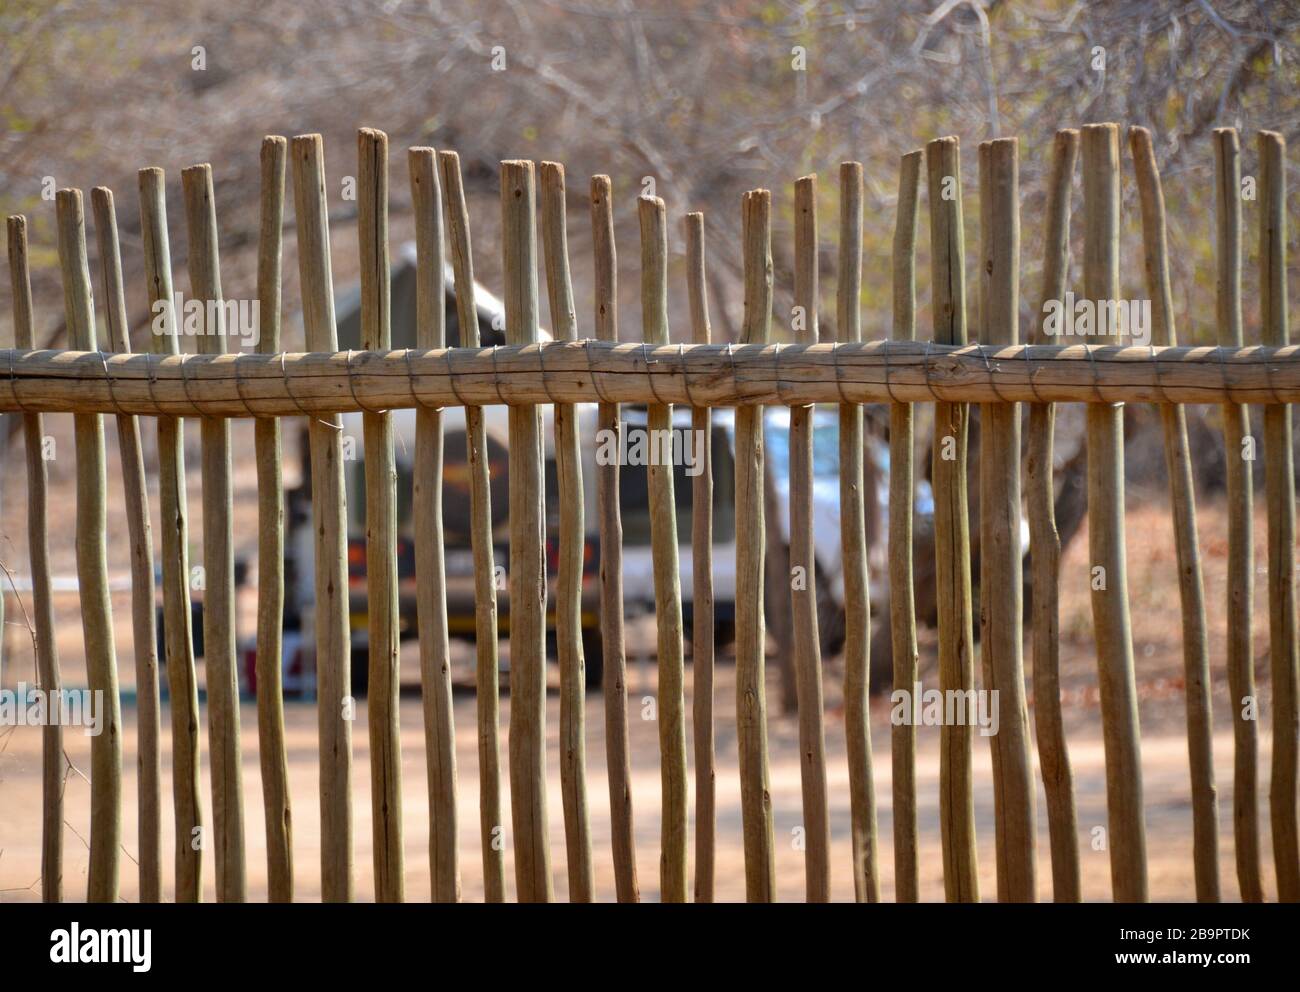 Uneven wooden game reserve fence at a camp site in Kruger National Park with a safari vehicle and tent visible in the background Stock Photo